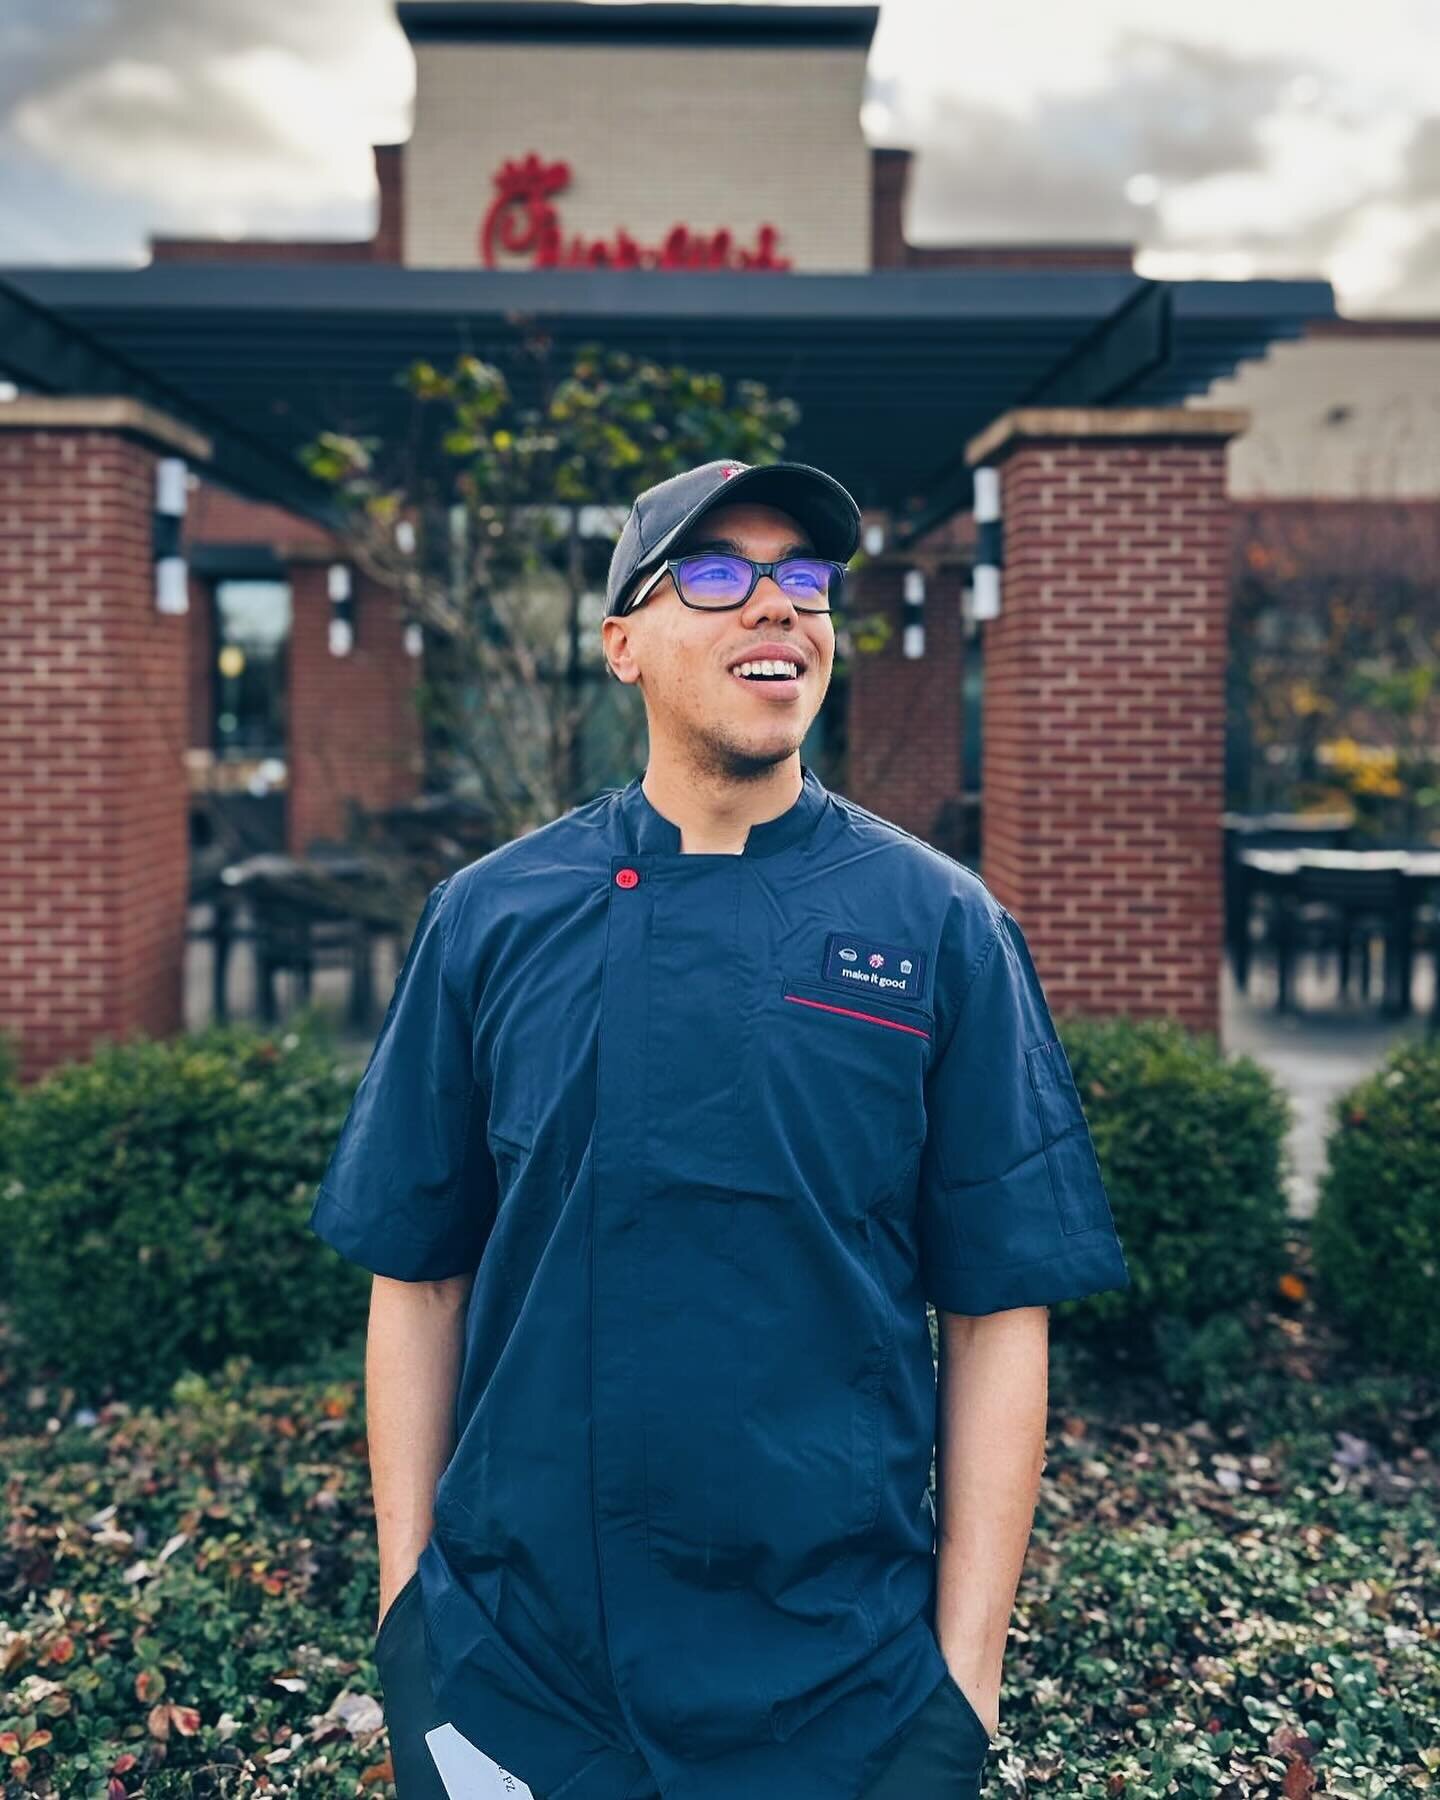 Meet our new Shift Leaders!

Photo One: Adriz! Adriz is our newest Back of House Shift Leader. He has been working at Chick-fil-A Tanasbourne for only 3 months! He quickly captivated our team with his quick wit and hard work 💪

Photo Two: Sam! Sam i